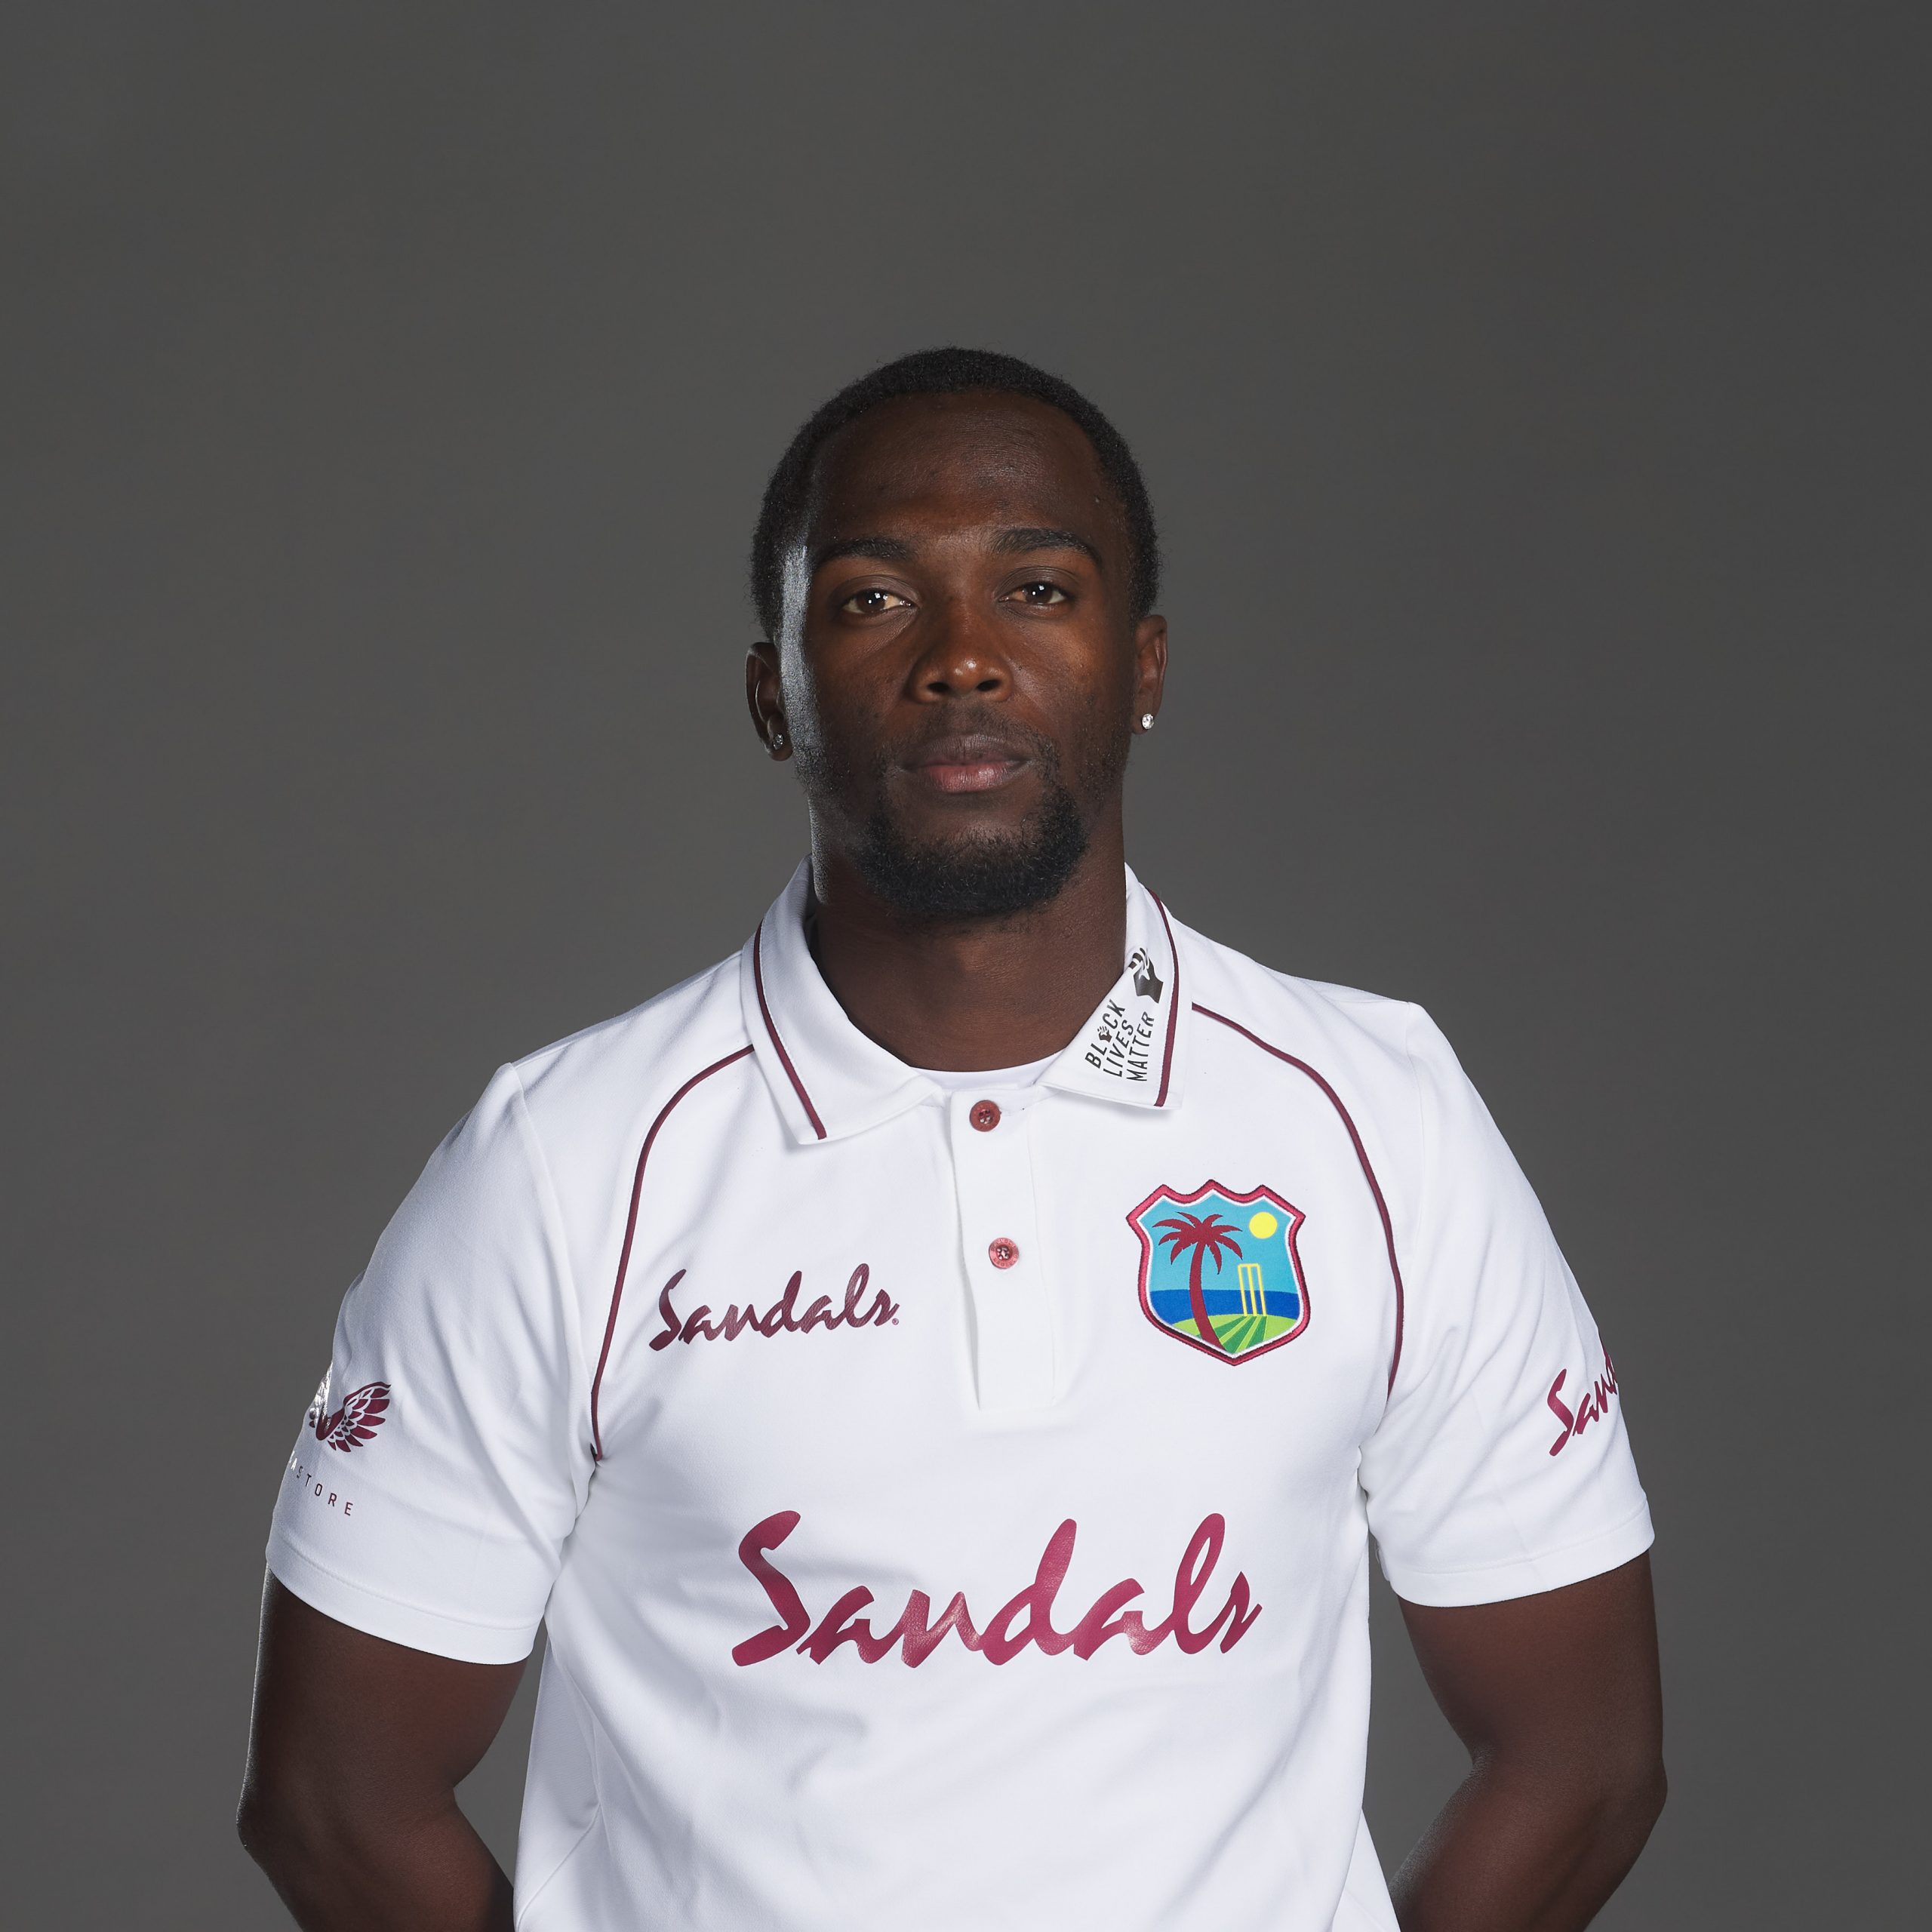 Mindley cleared to rejoin Windies team after 2nd negative COVID test